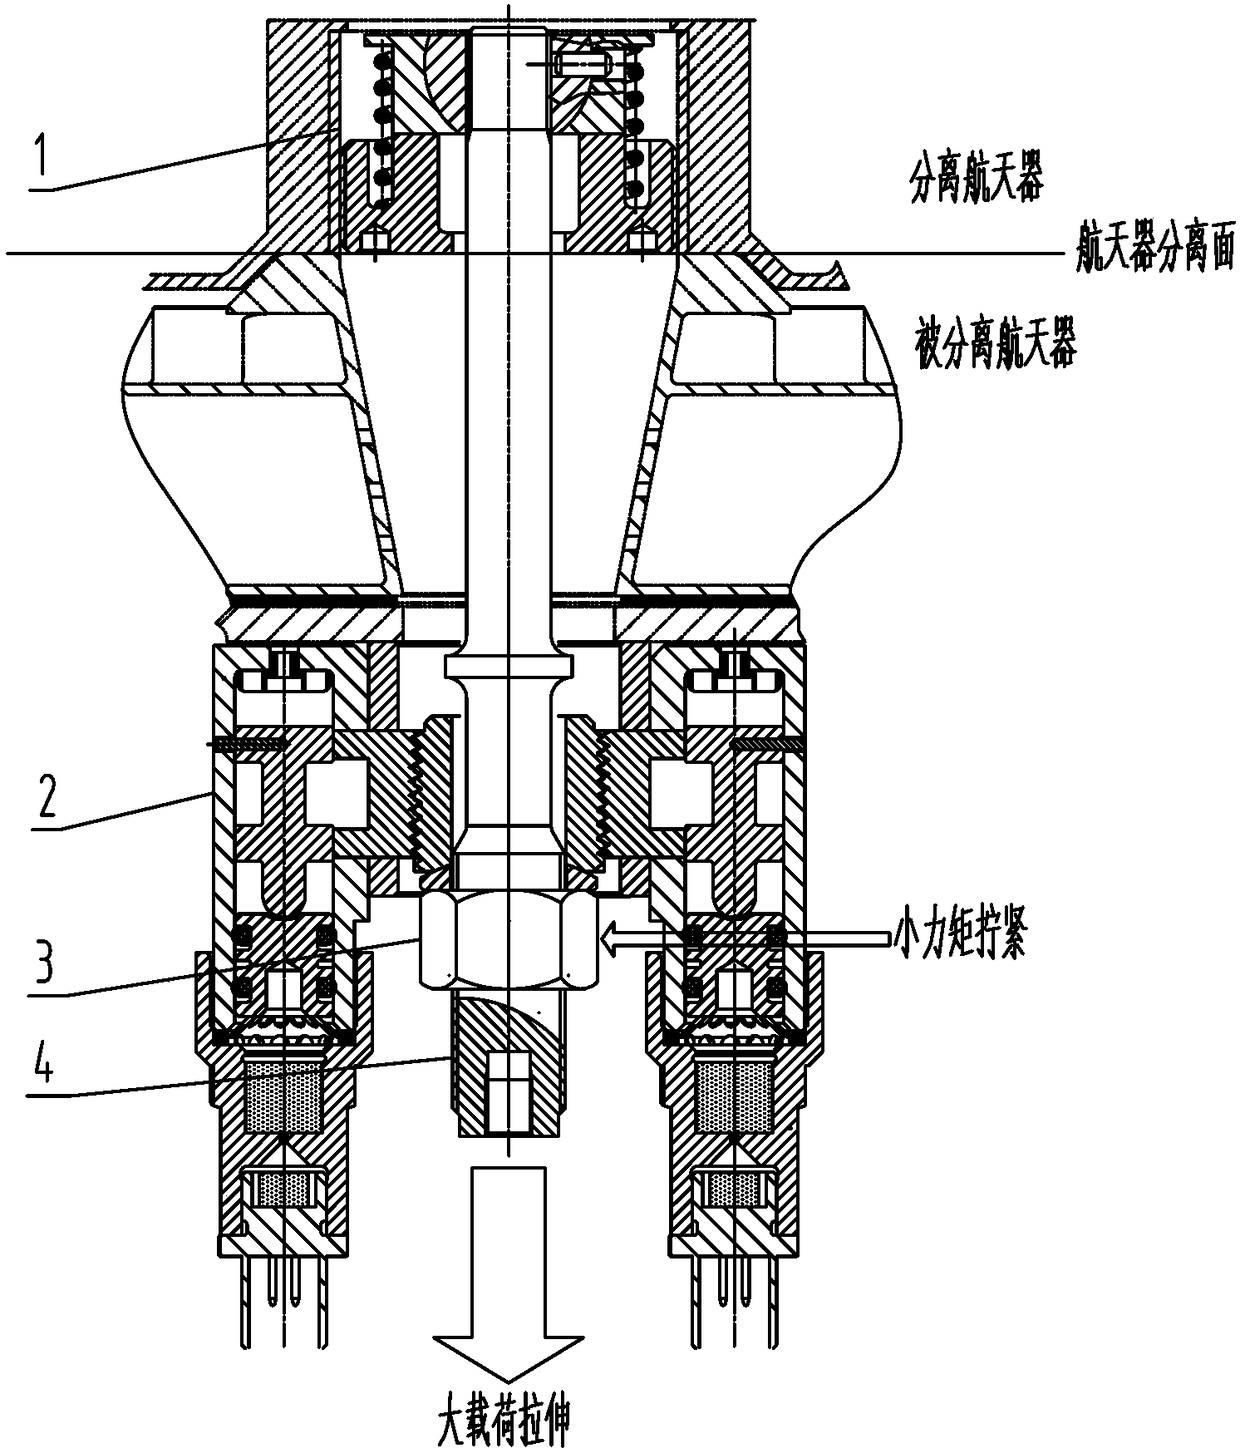 Four point synchronous hydraulic loading device for spacecraft docking